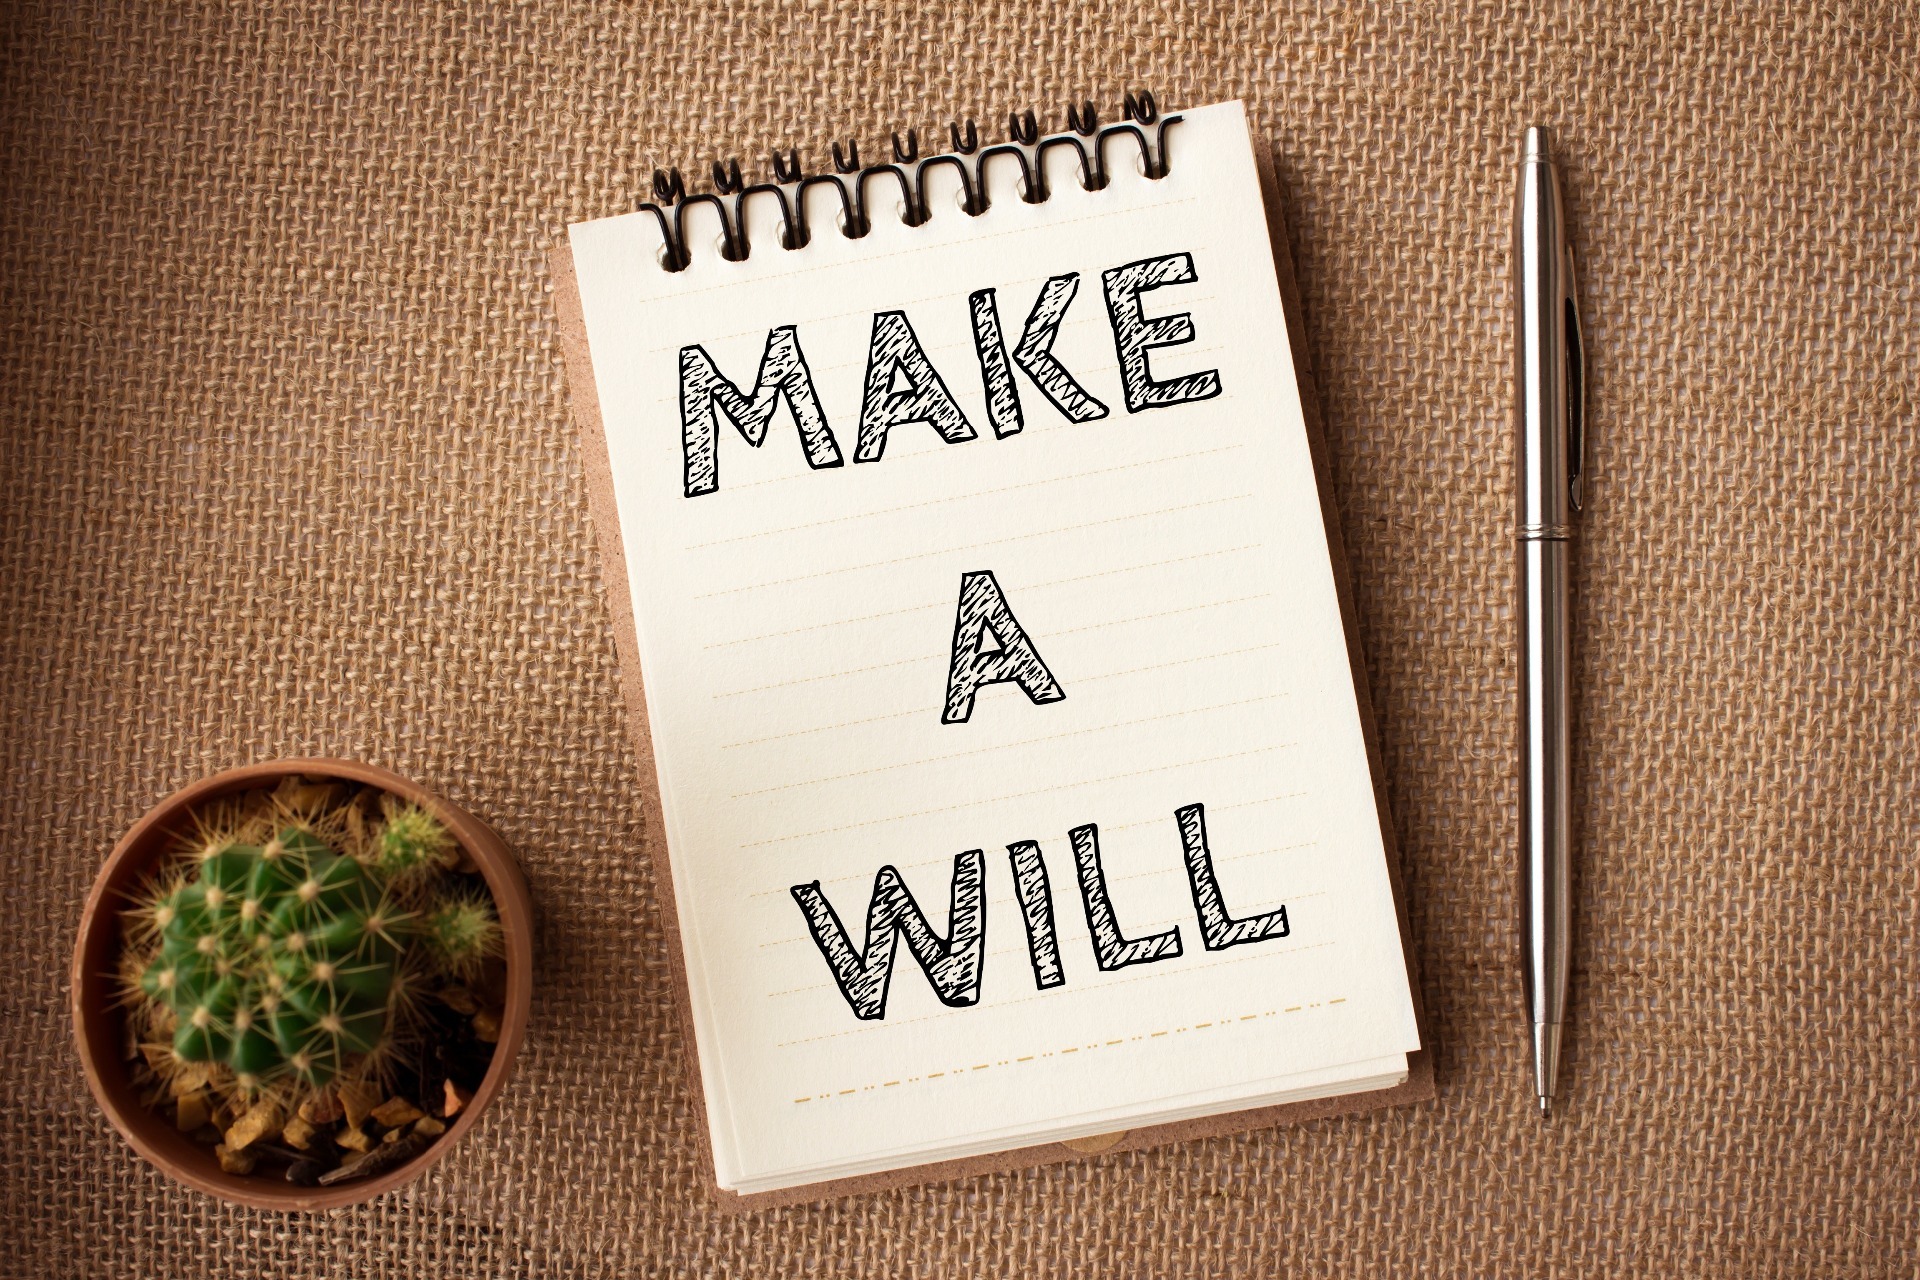 A notepad with "Make a Will" written on, next to a pen and a cactus; our Wills Solicitors in Lytham discuss whether a person who owns property needs a Will.